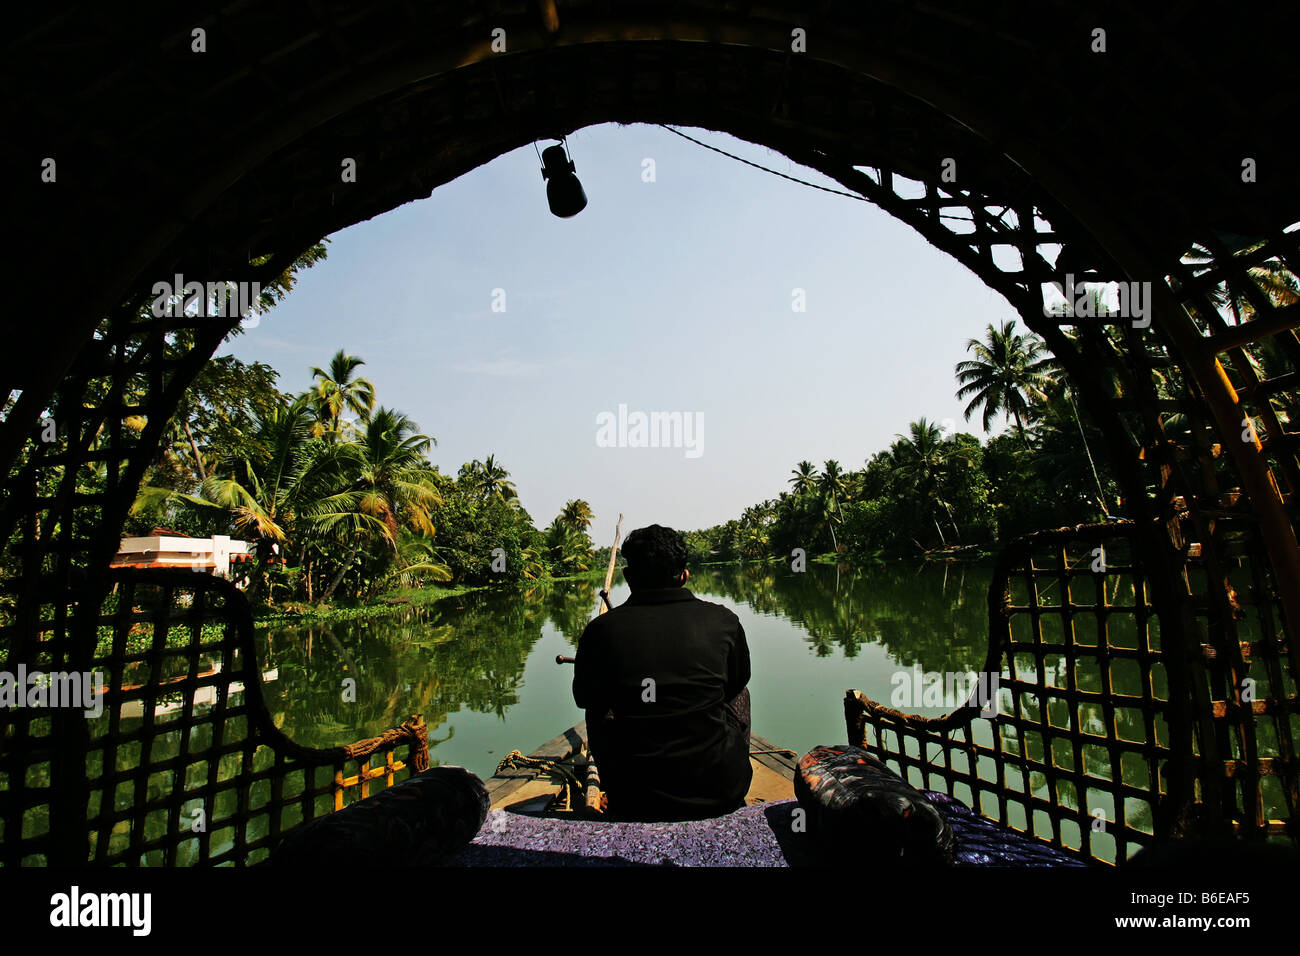 A boat captain steers a houseboat along the backwaters of Kerala India Stock Photo